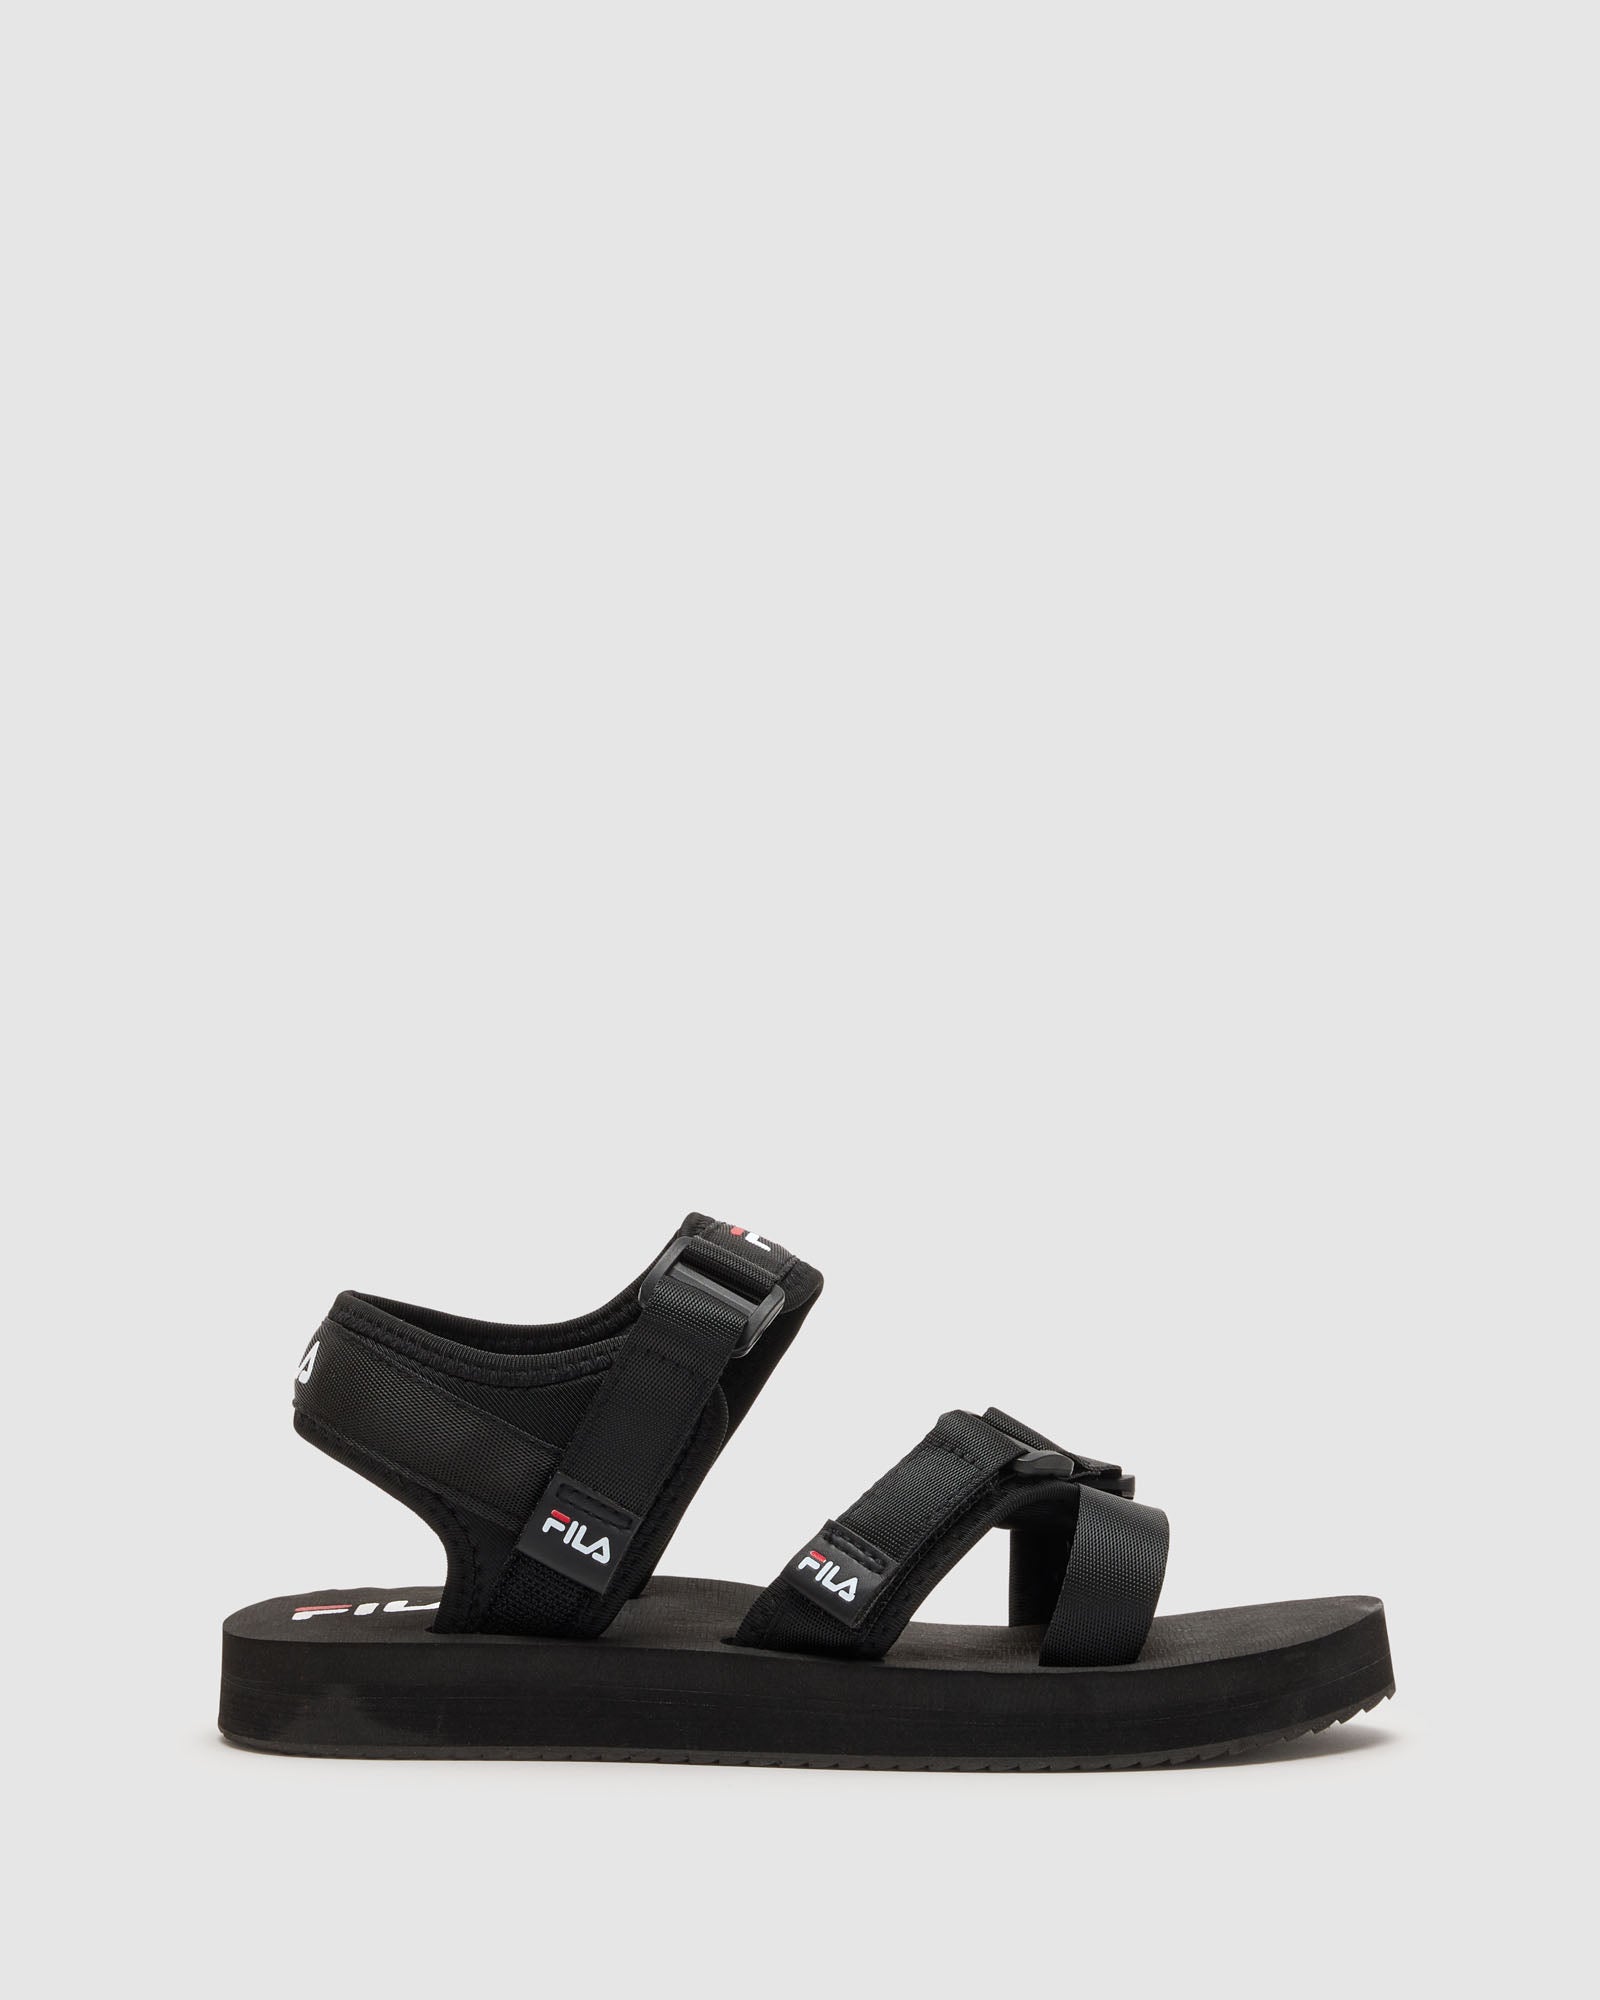 Fila Shoes, Sandals + Slides, In-Store and Online